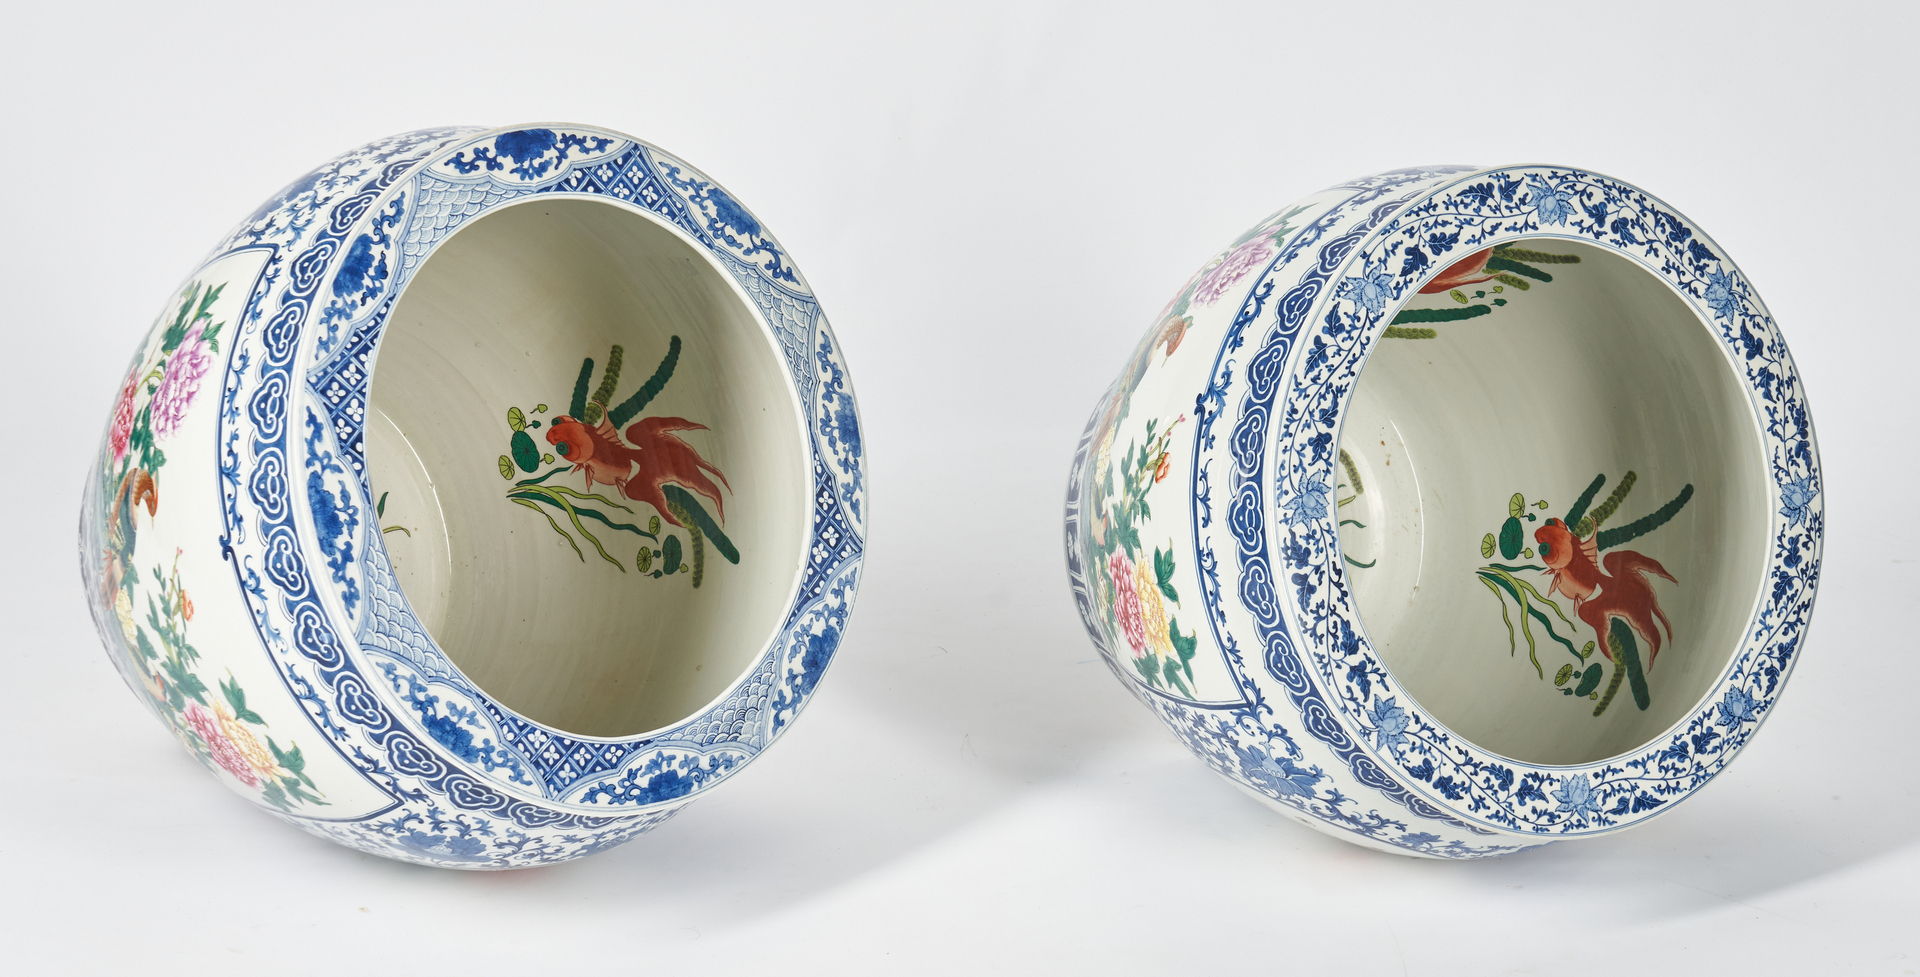 Lot 394: Near Pair of Blue and White Porcelain Fish Bowls